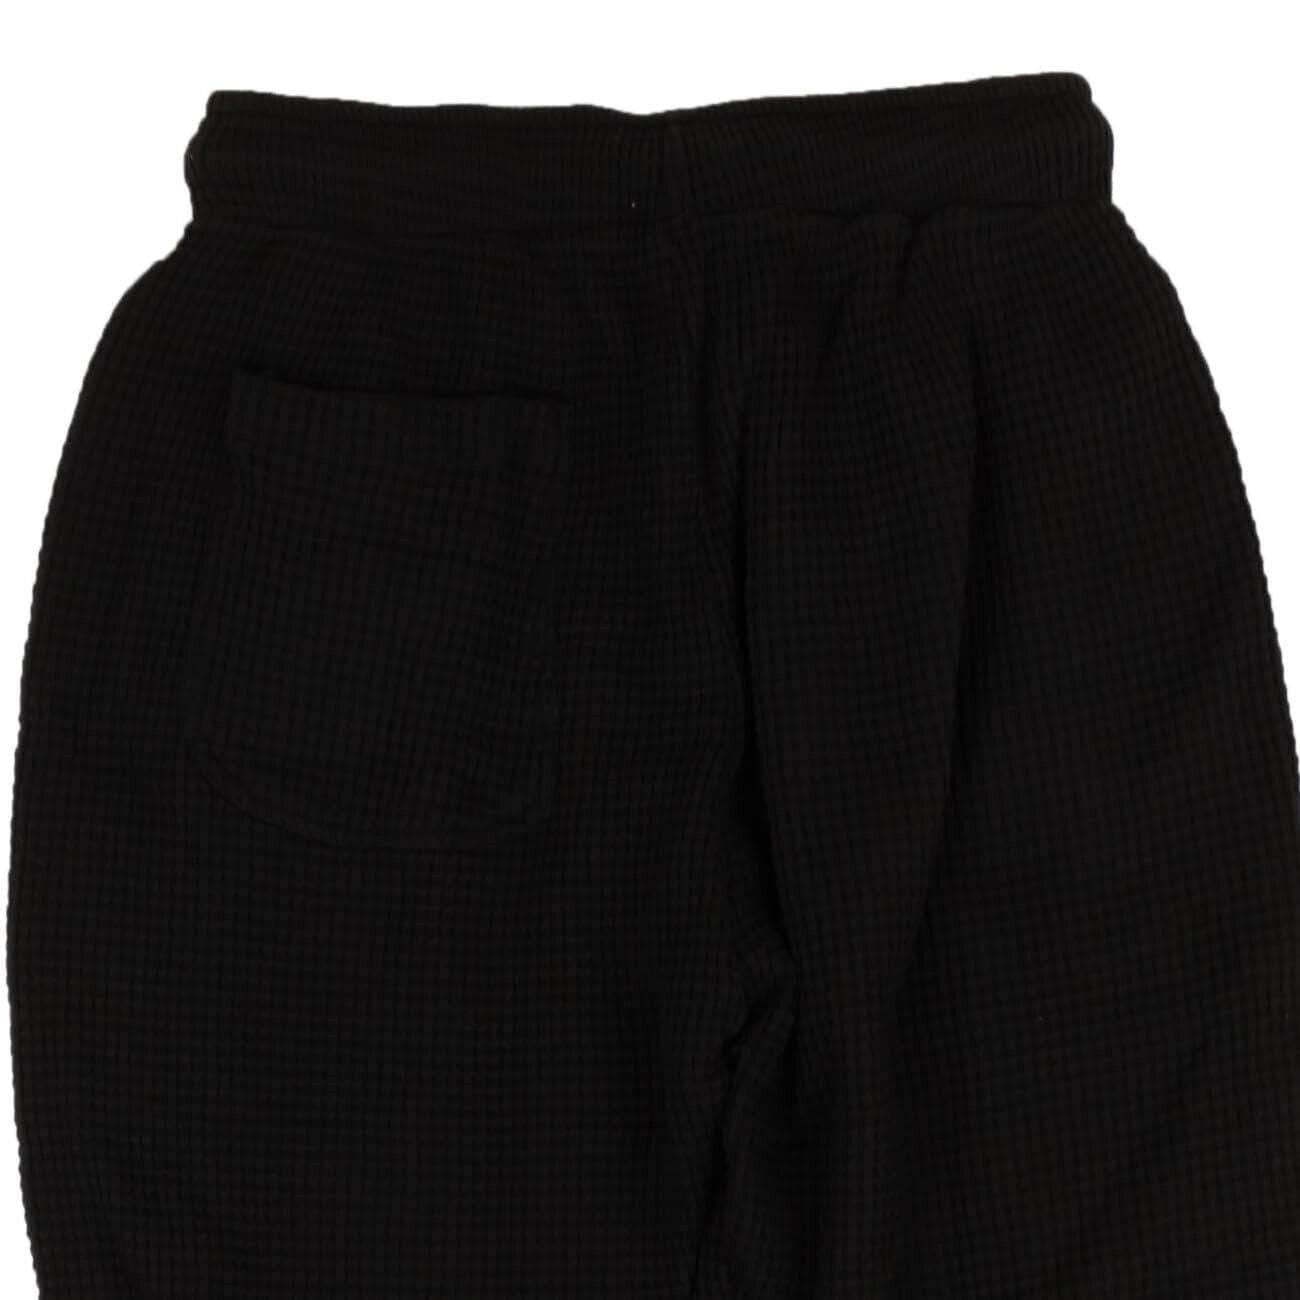 424 ON FAIRFAX 424-on-fairfax, channelenable-all, chicmi, couponcollection, gender-mens, main-clothing, mens-joggers-sweatpants, mens-shoes, size-s, under-250 S / 95-424-1141/S Black Waffle Knit Double Layer Sweatpants 95-424-1141/S 95-424-1141/S